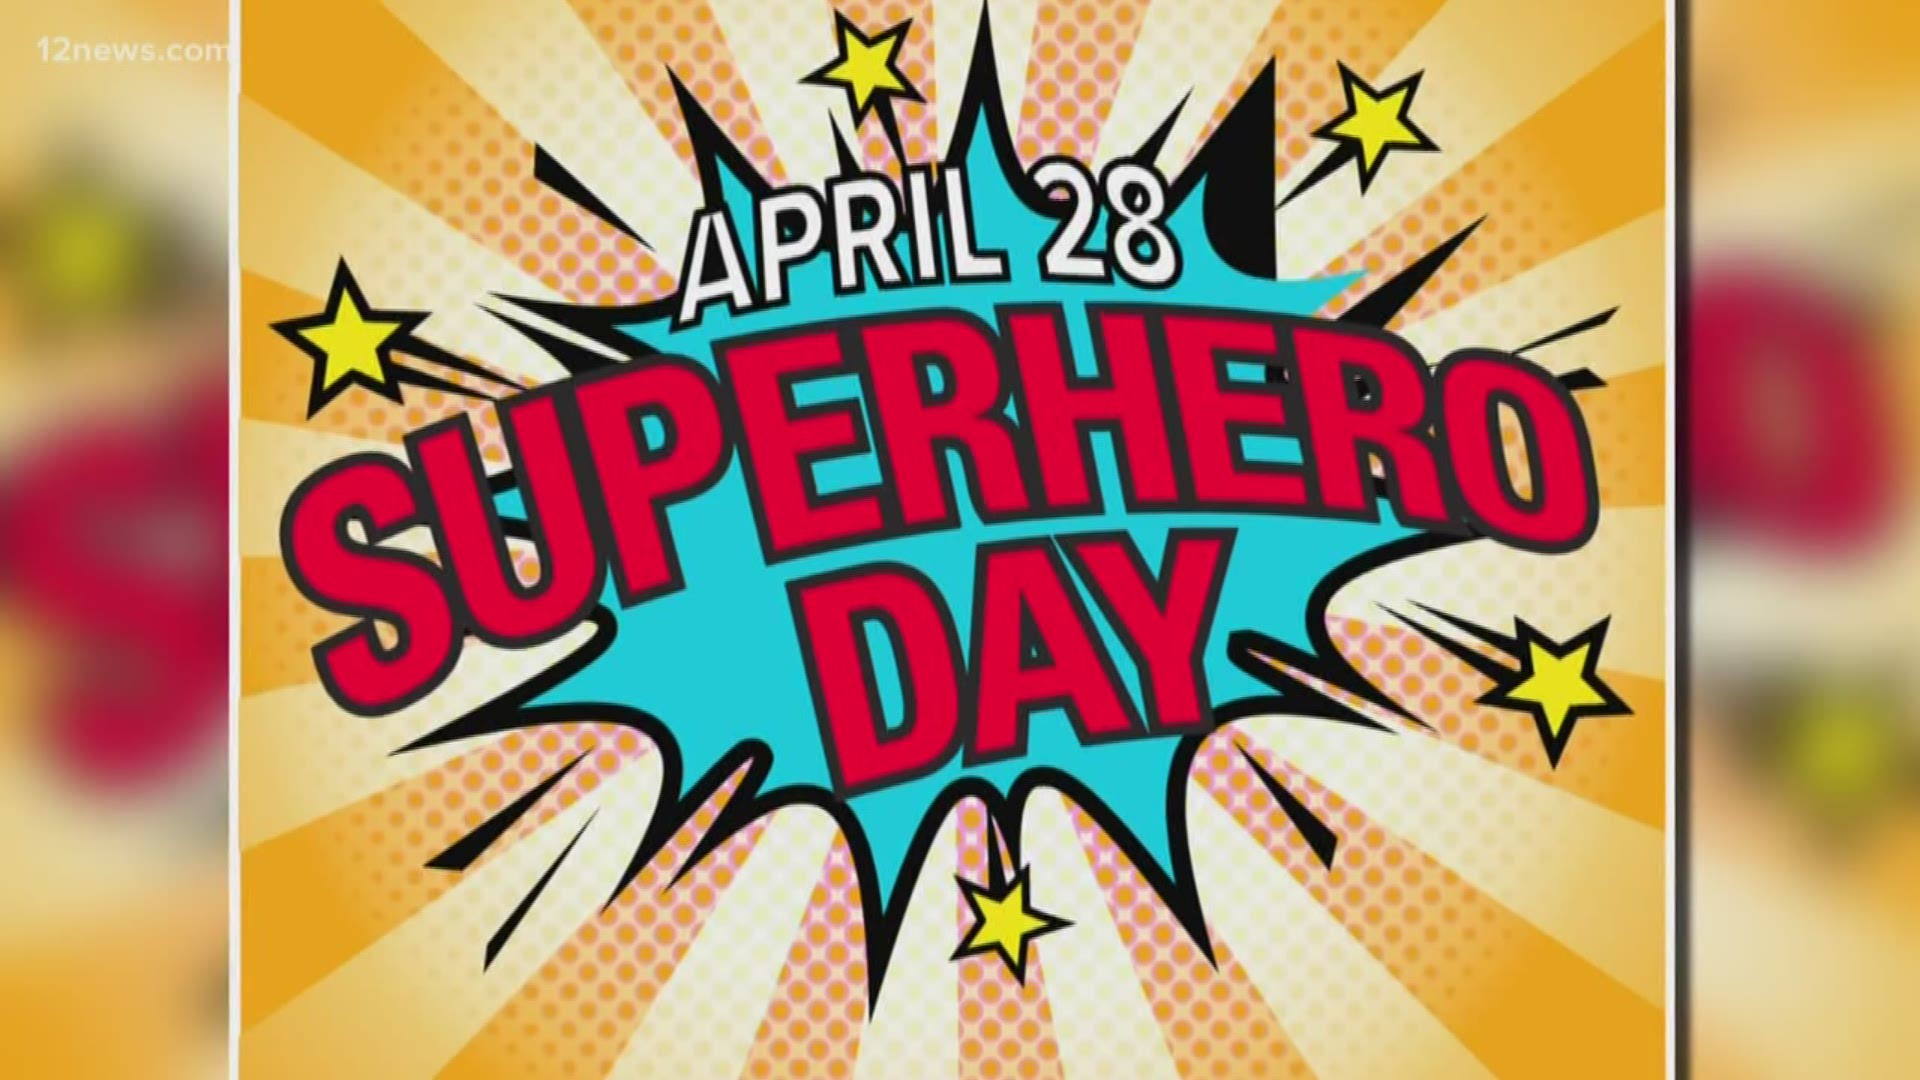 In honor of National Superhero Day 12 News asked viewers to tell us who their superhero is. We got great responses nominating superheroes from across the Valley!